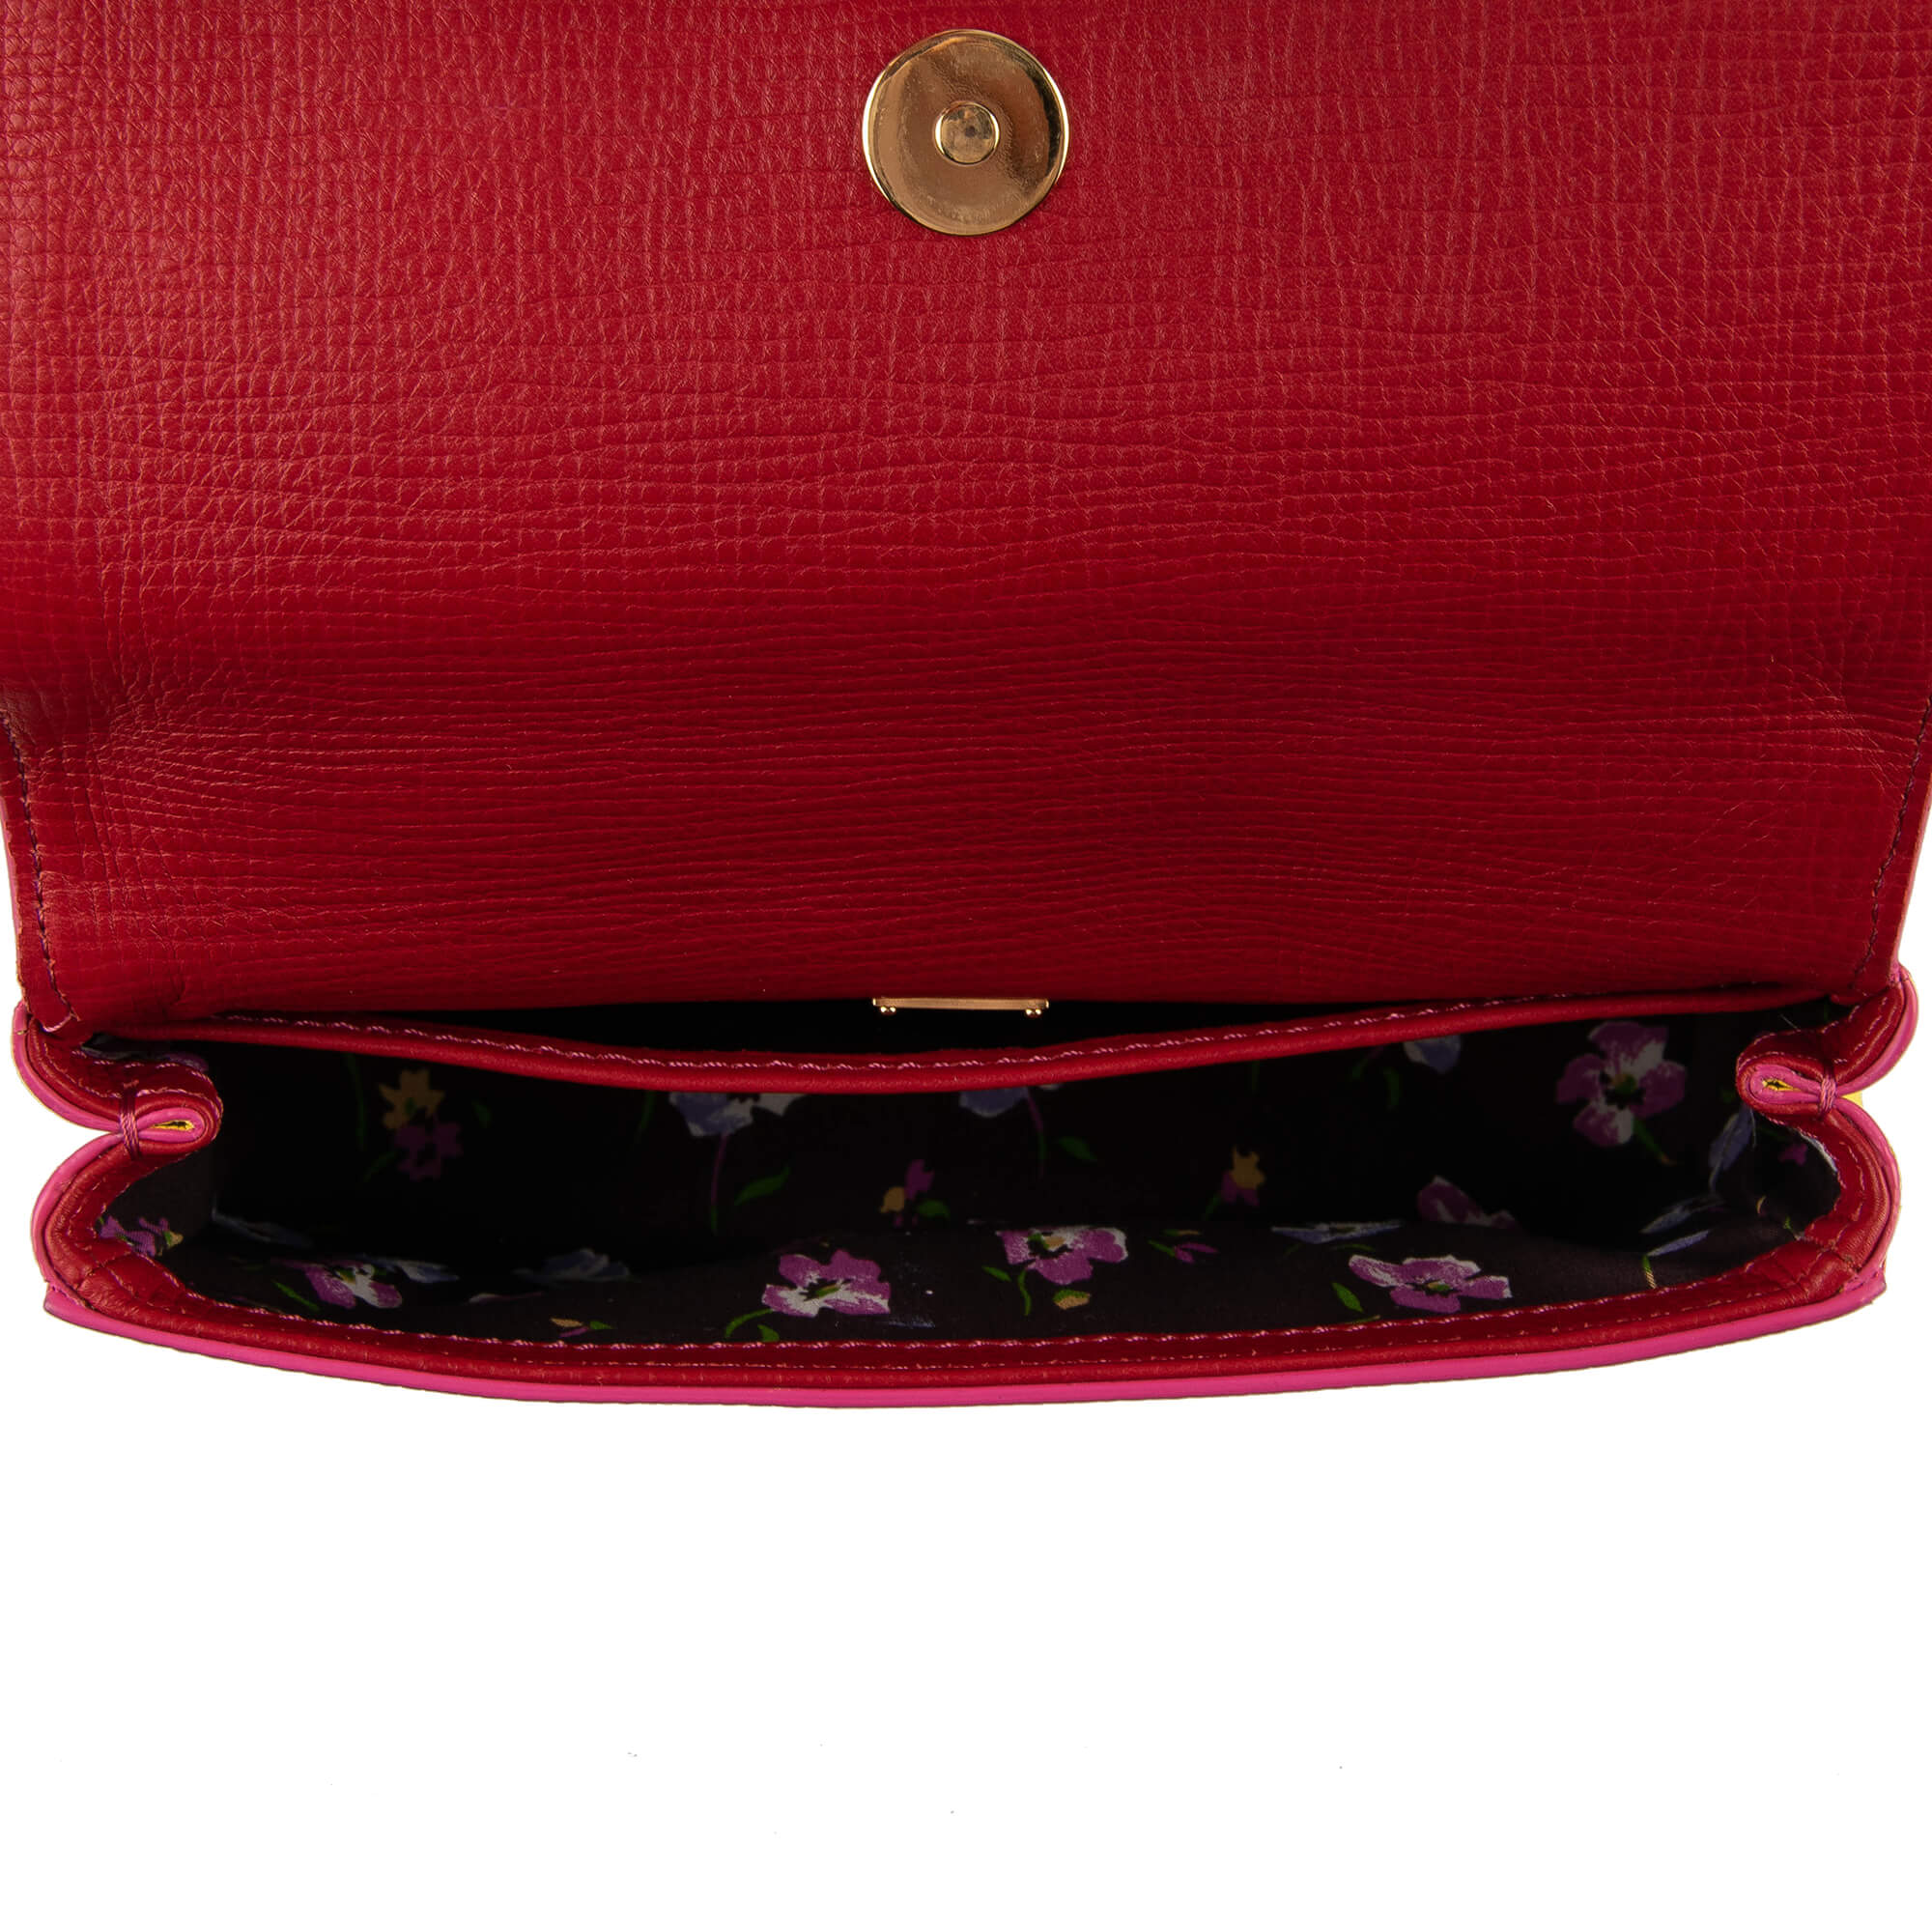 Dolce & Gabbana Leather Bag MISS SICILY Mini Green Red